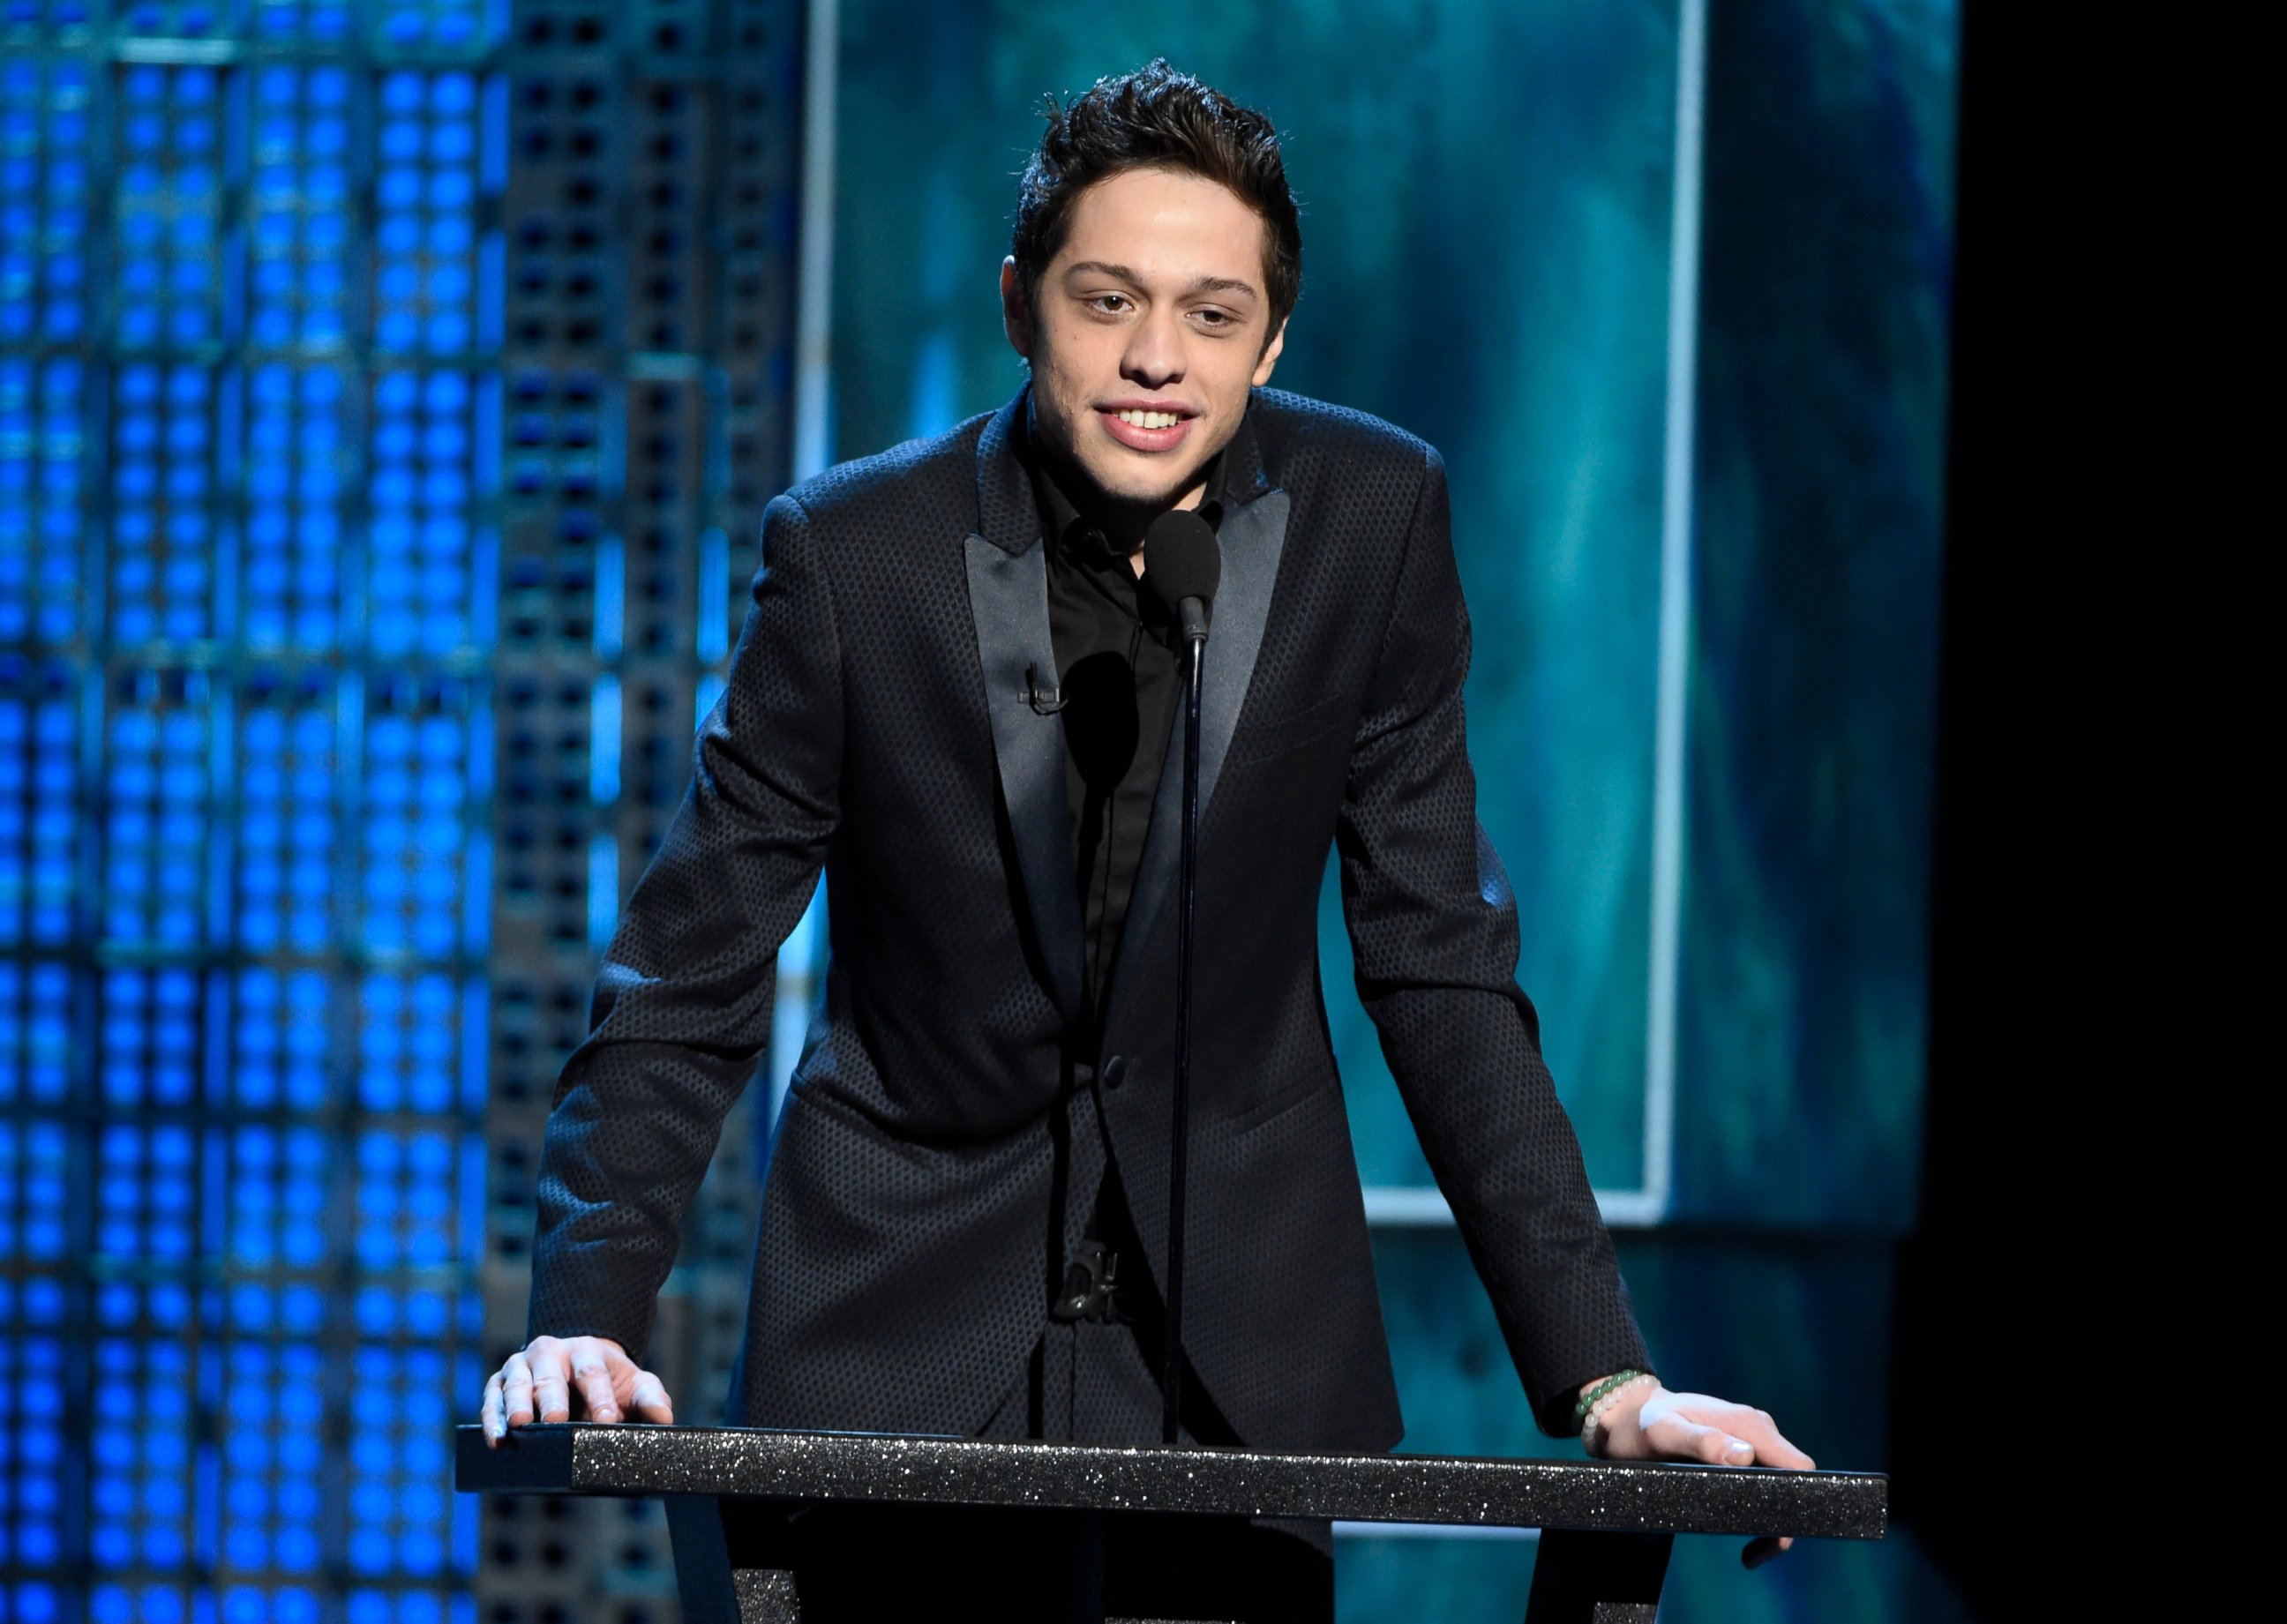 PHOTO: In this March 14, 2015, file photo, Pete Davidson speaks at a Comedy Central Roast in Culver City, Calif.